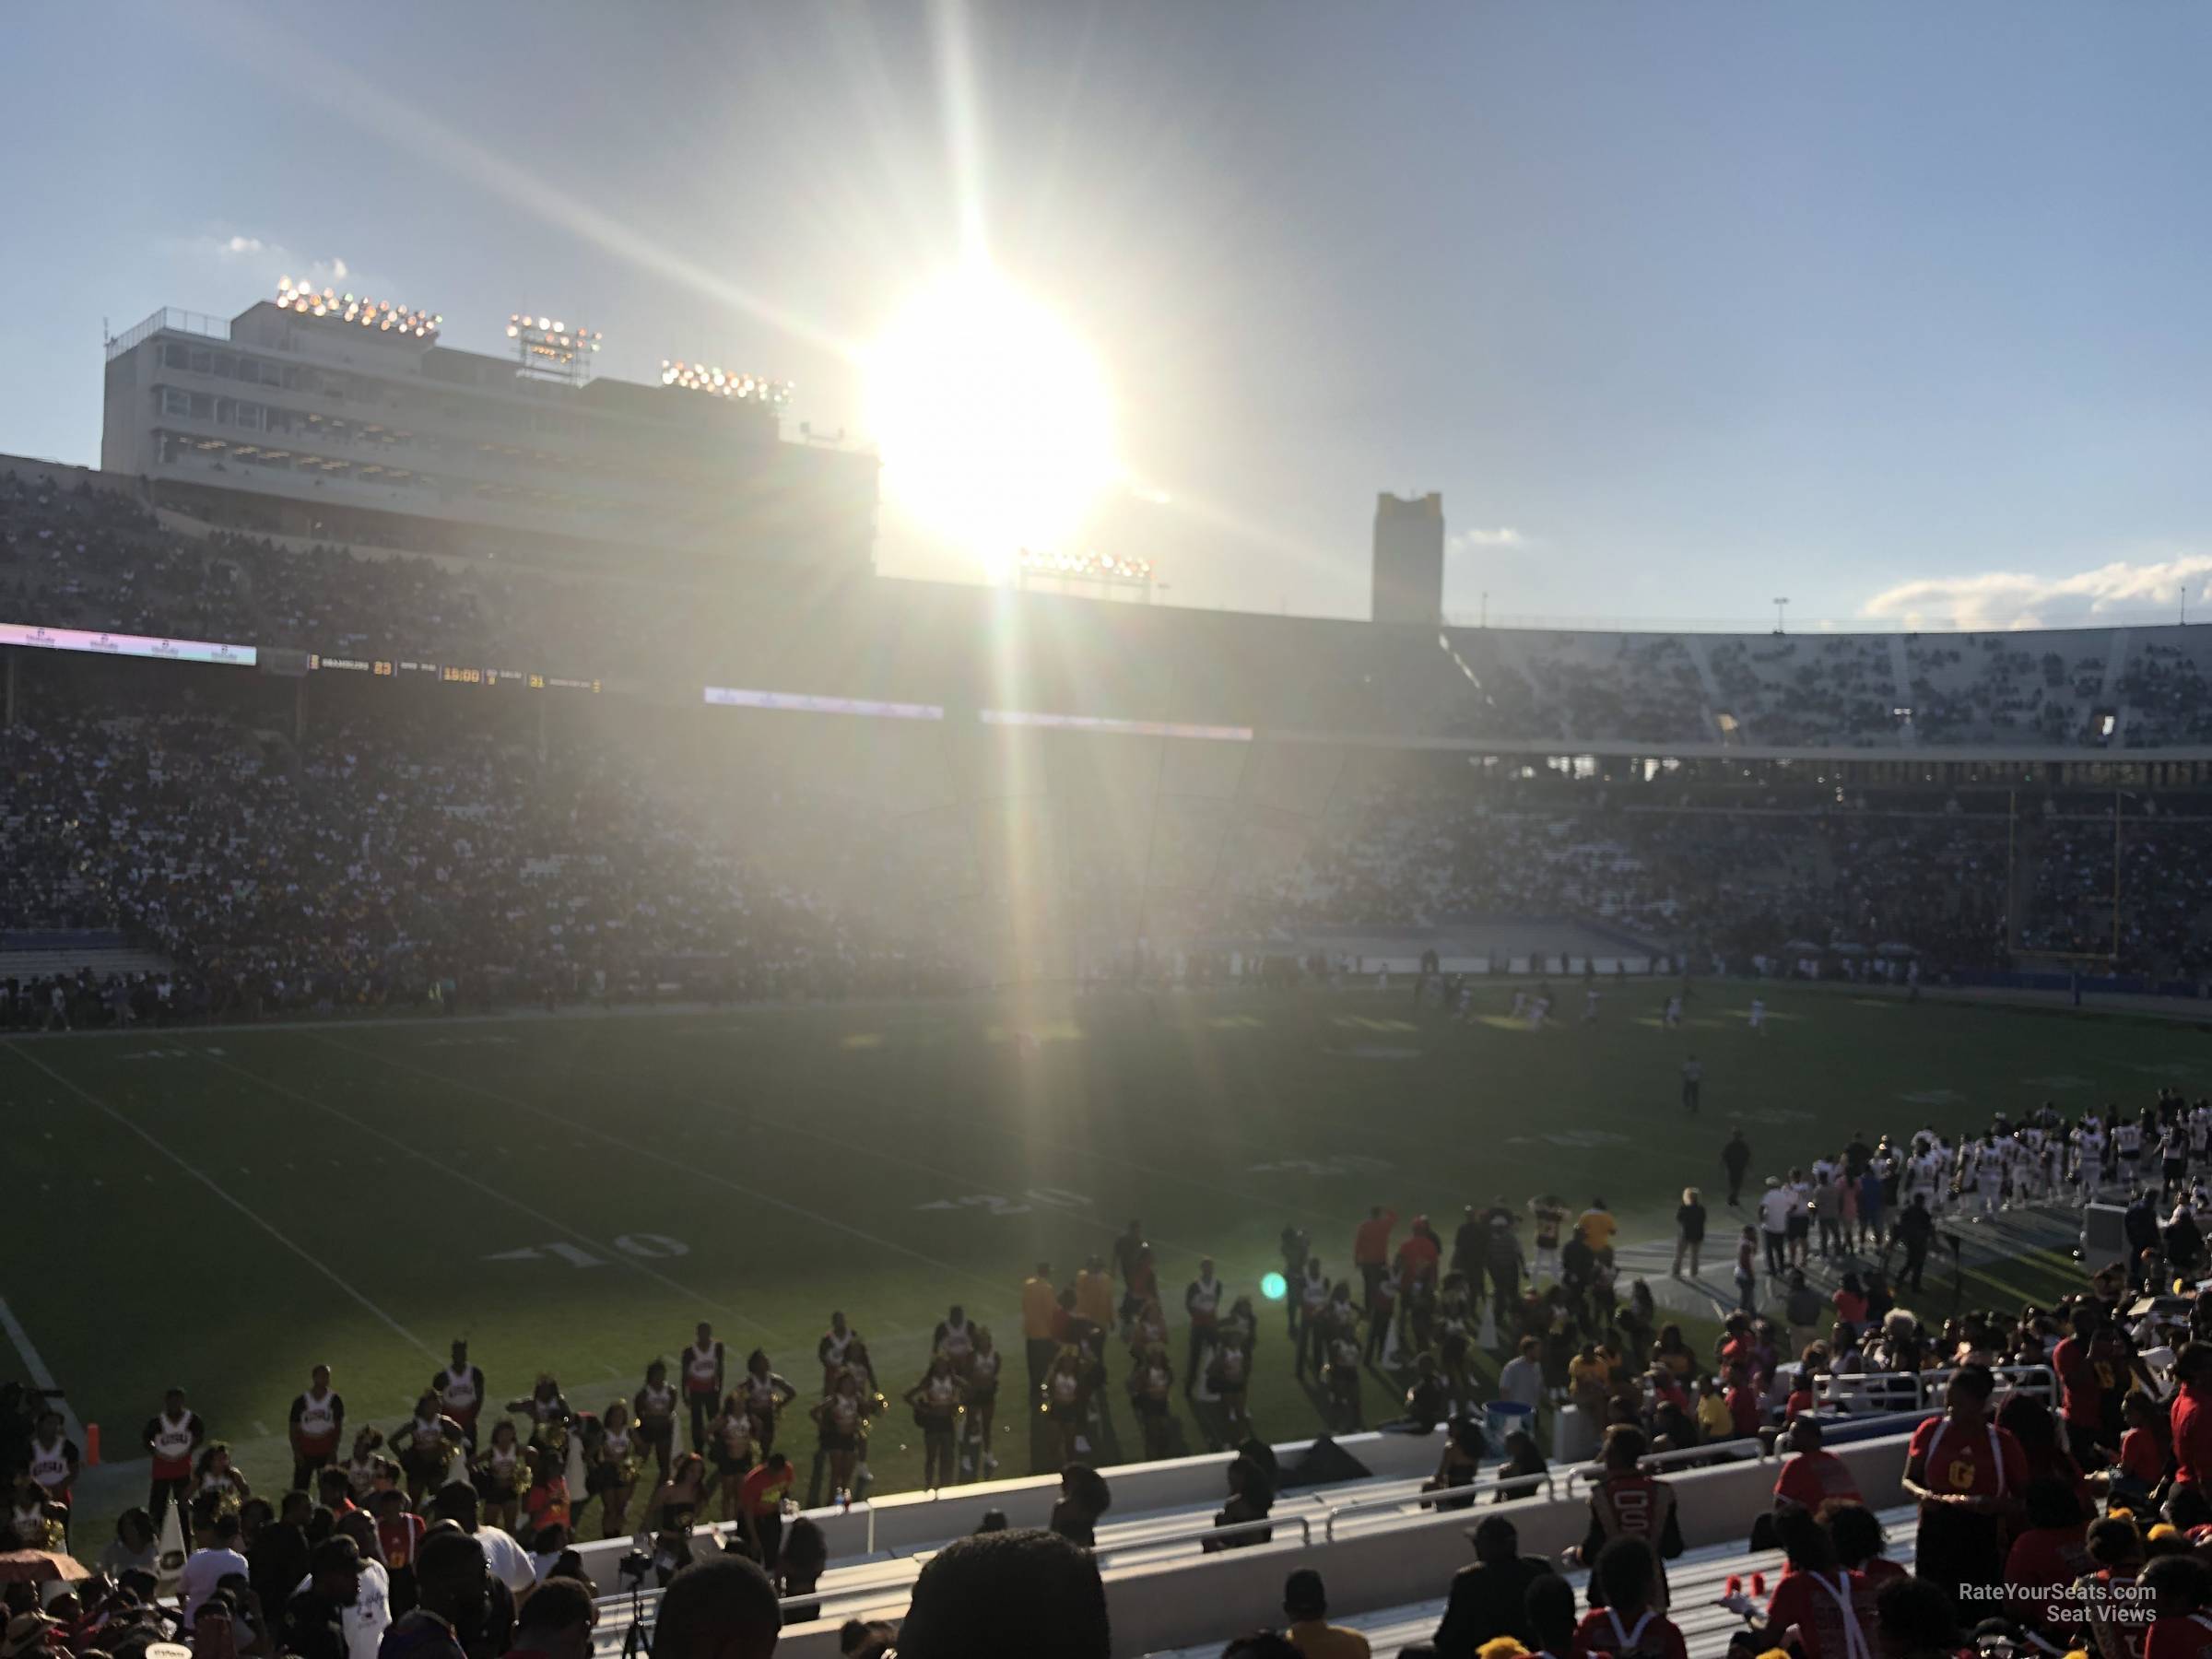 section 28, row 20 seat view  - cotton bowl